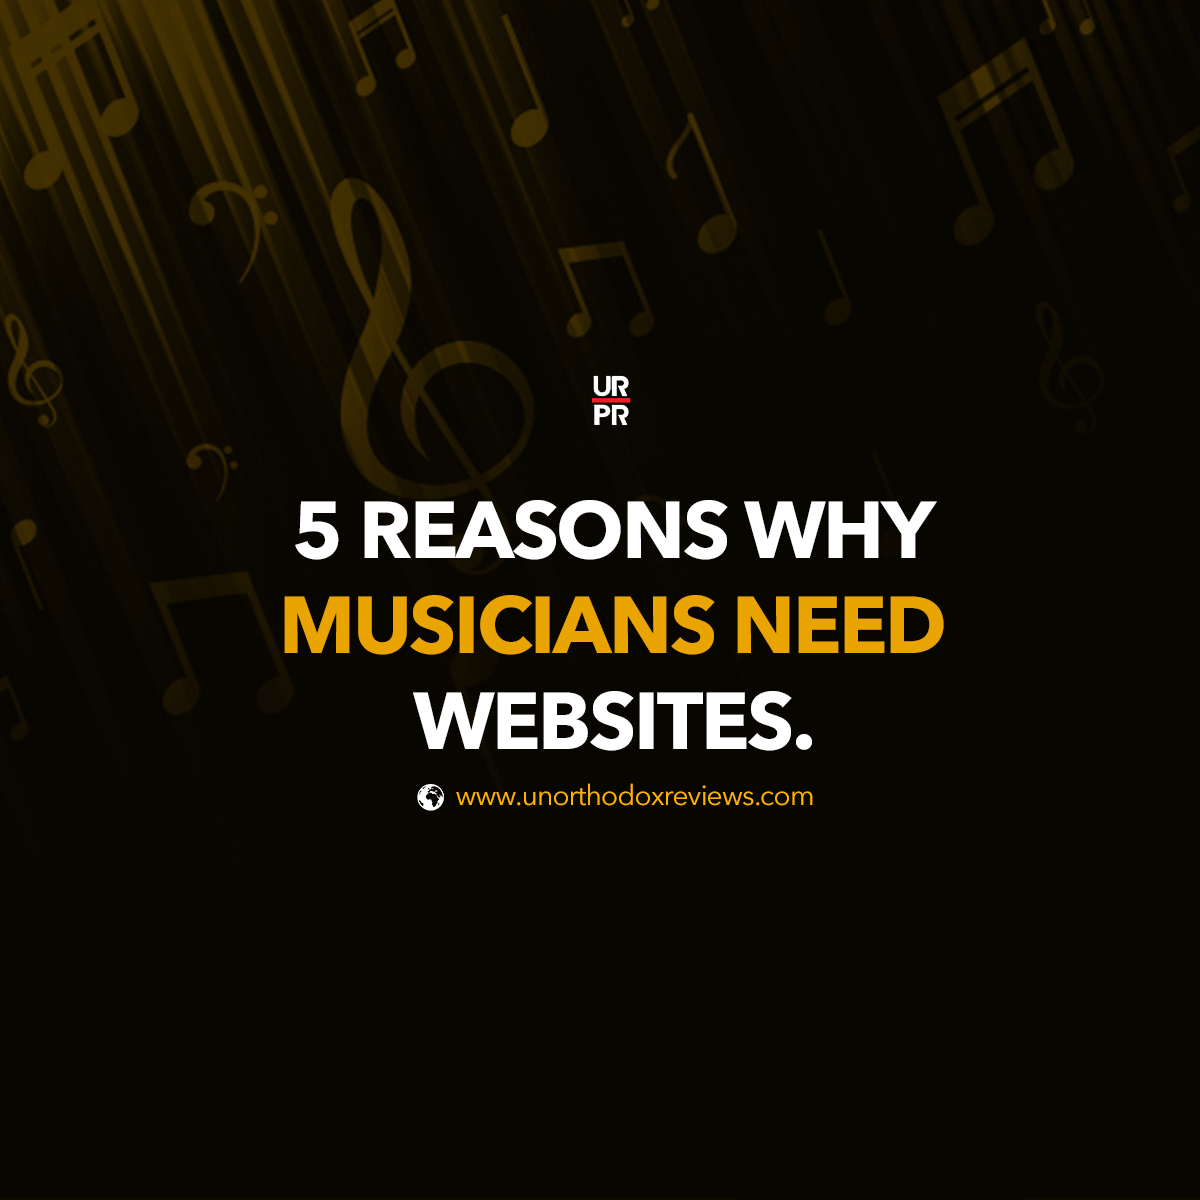 Reasons Why Musicians Need Websites